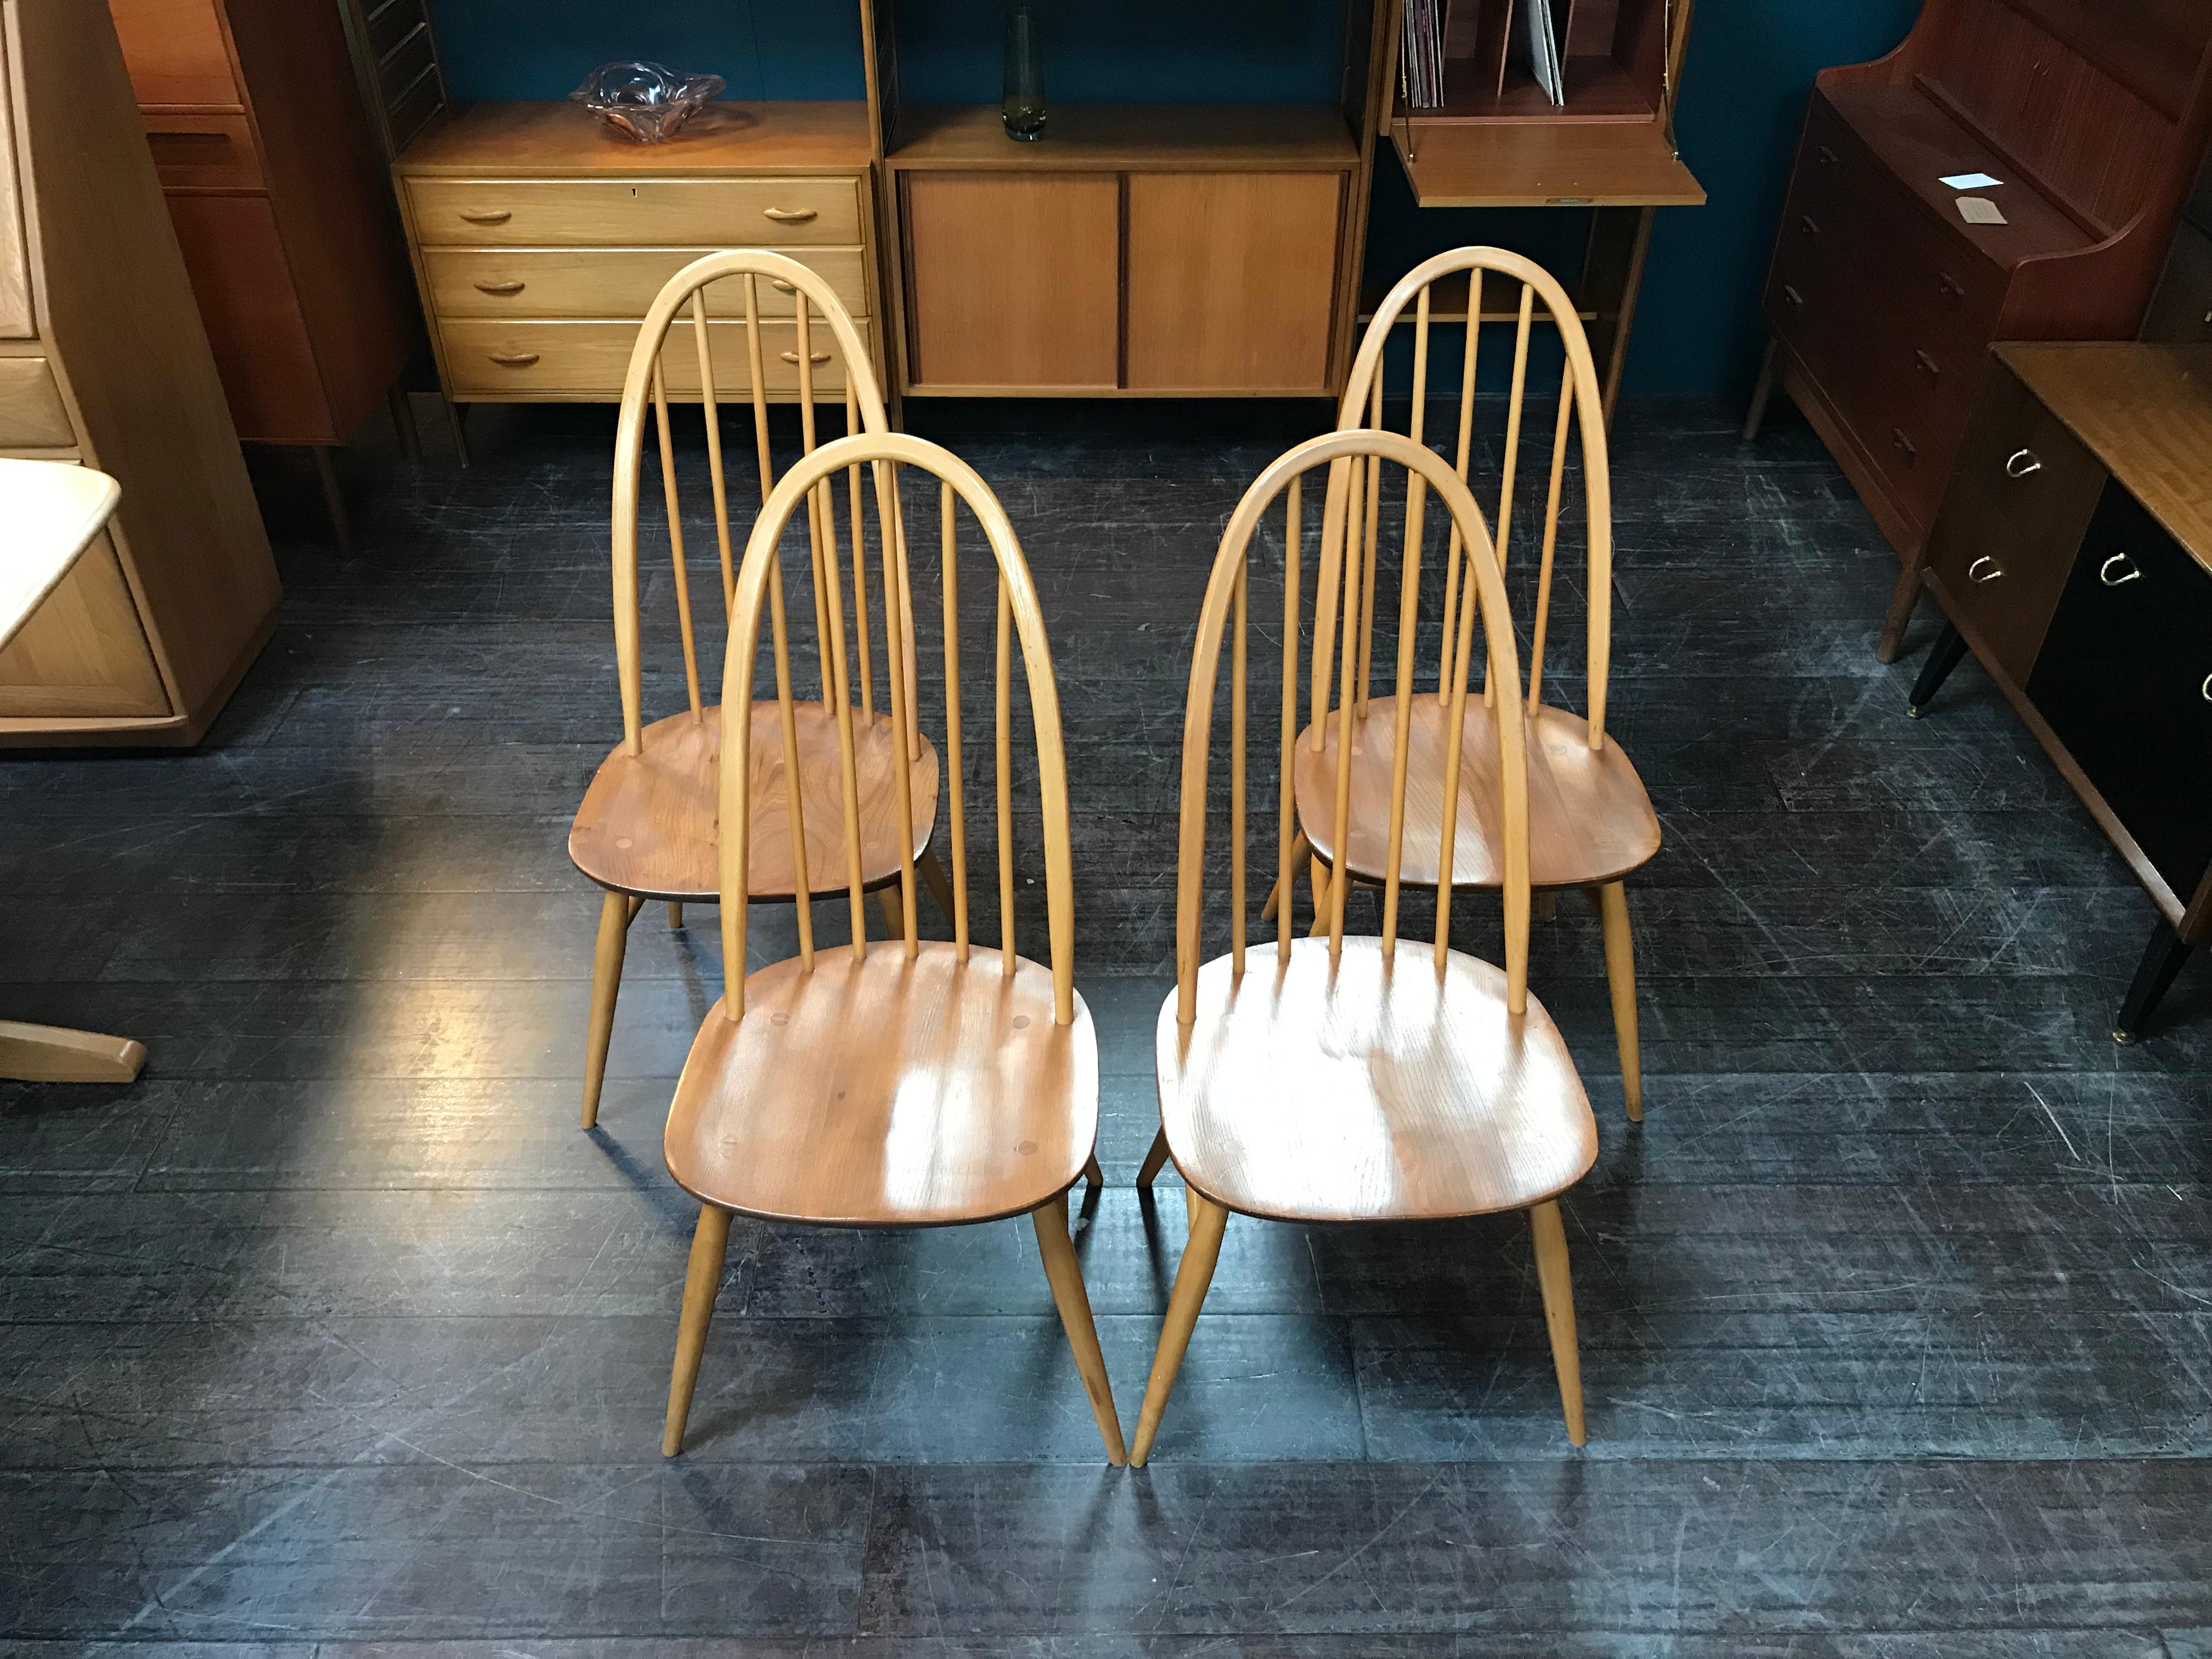 This is a set of Quaker dining chairs in sought-after light wood. Perfect for any living space, these beautiful chairs are made from solid elm and beech. They feature Ercol’s characteristic stick-back look, creating a greater sense of space and